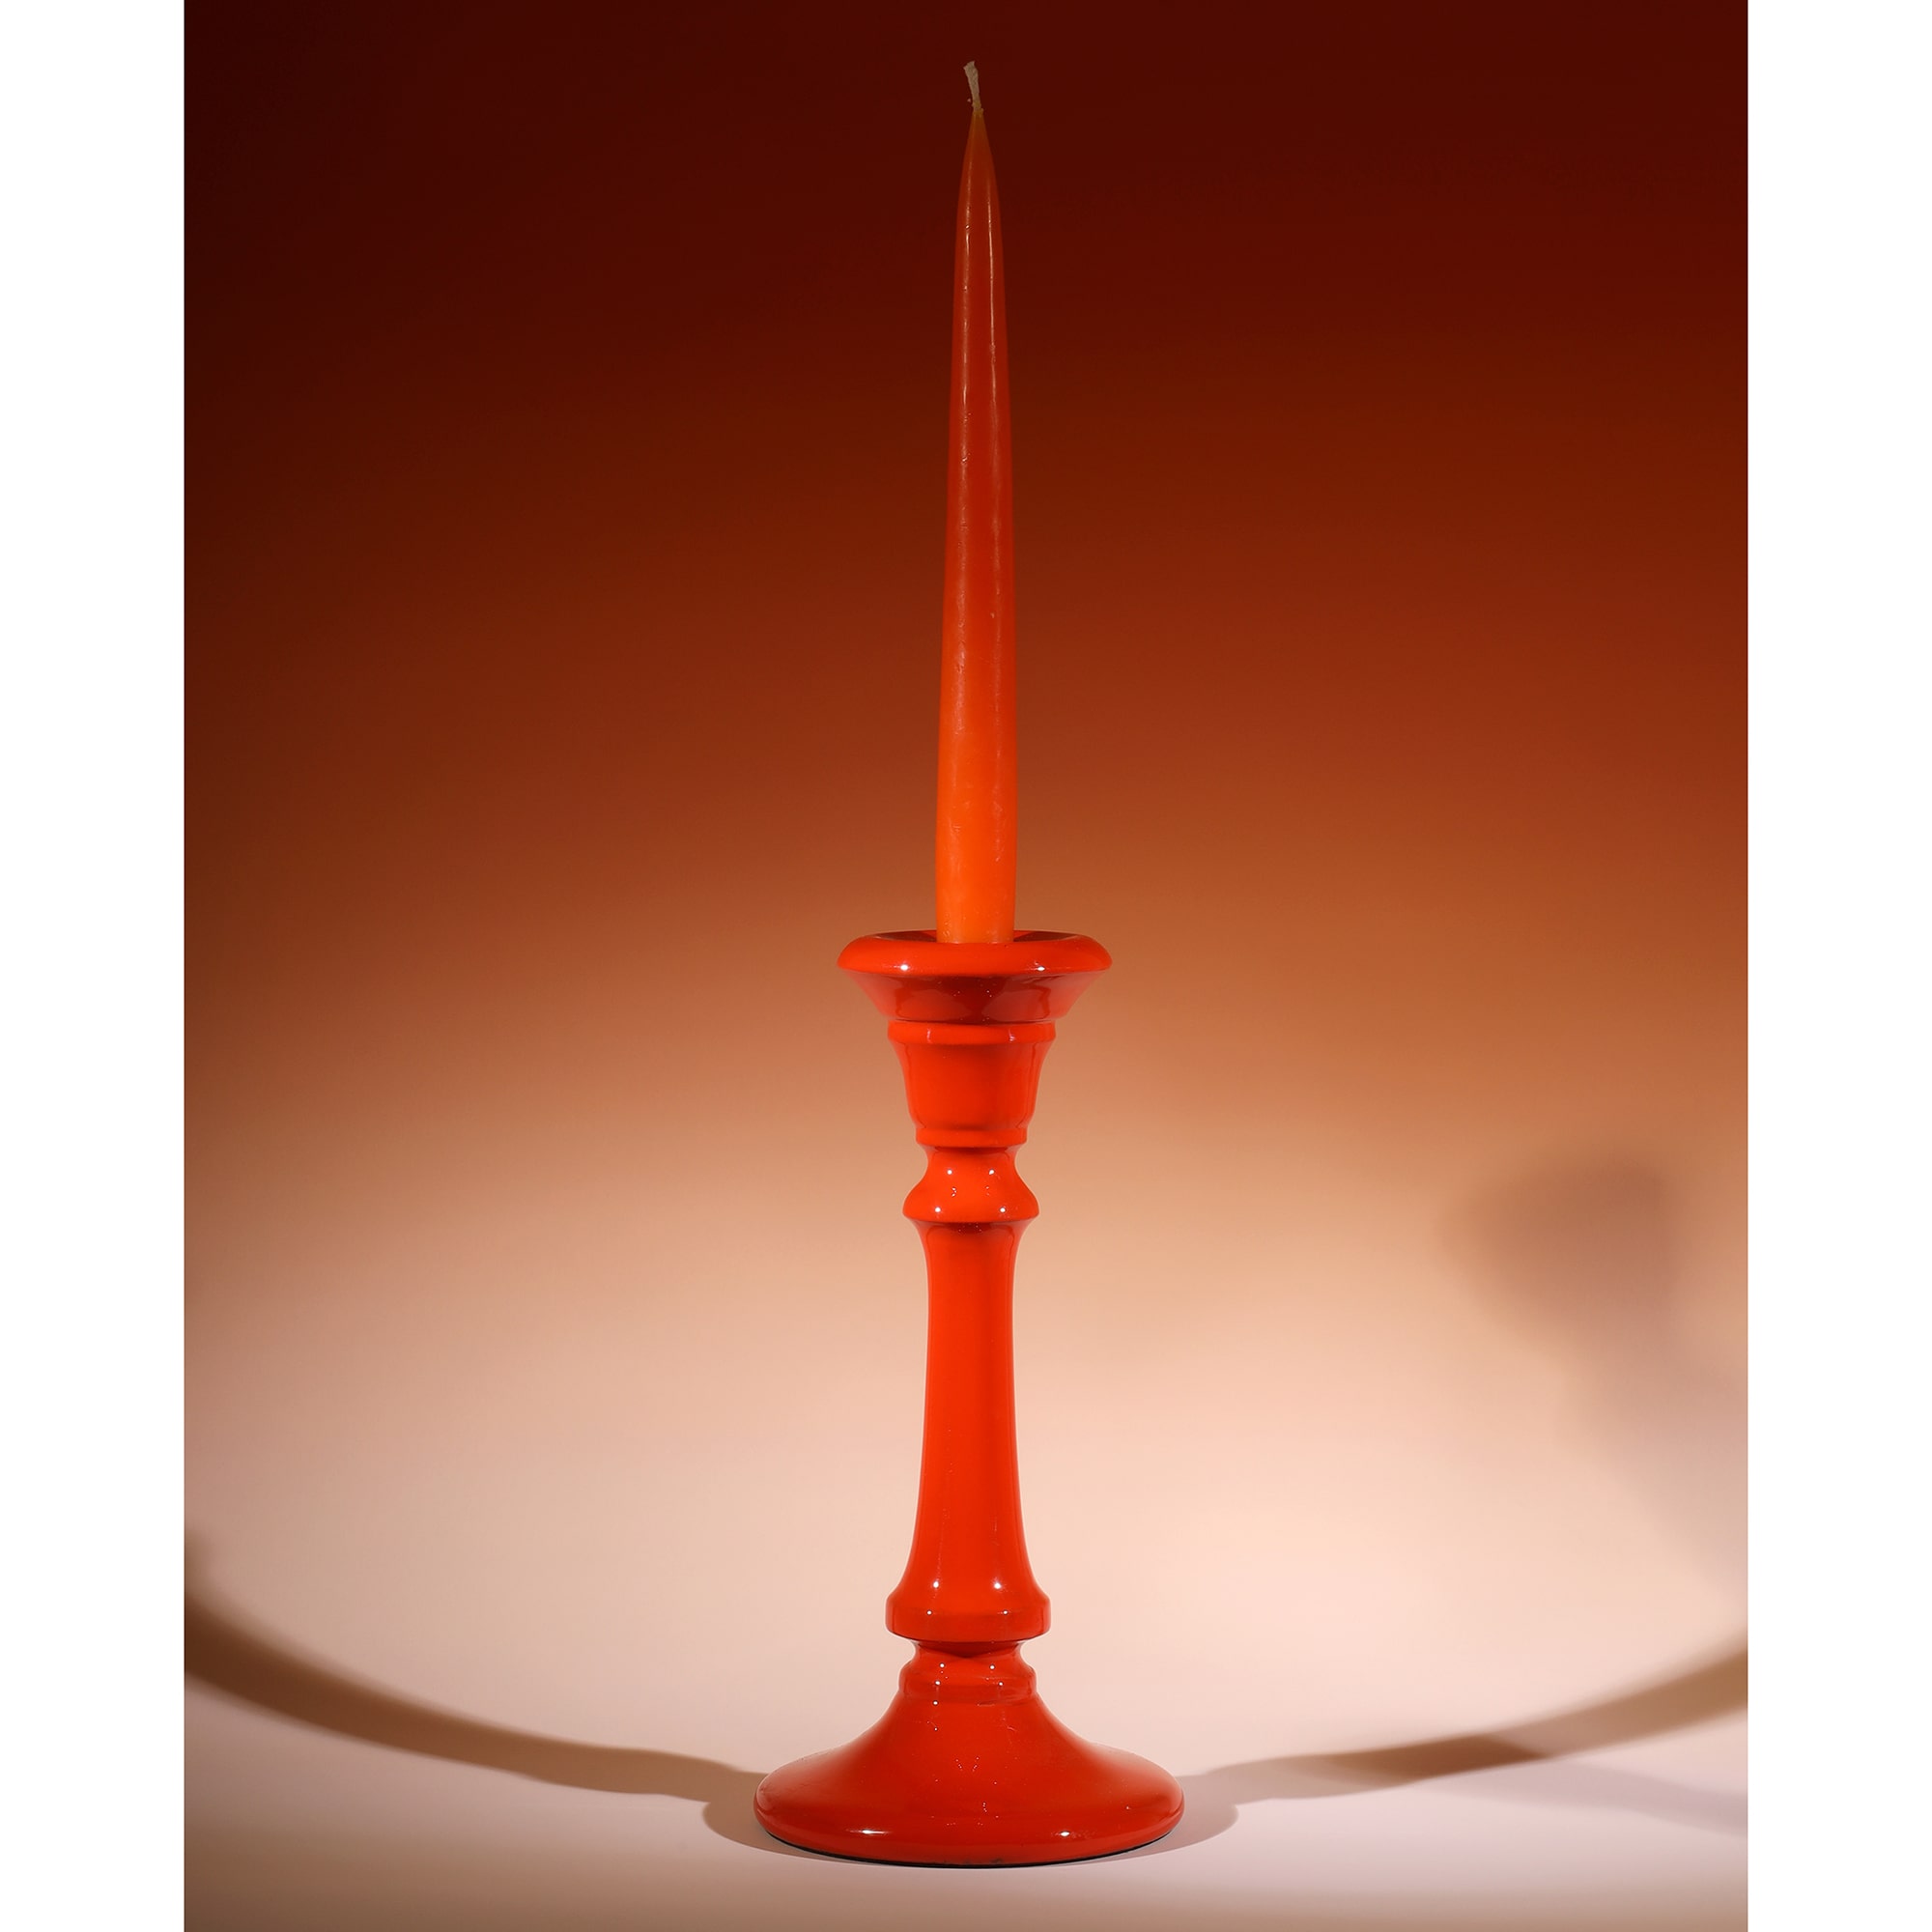 Sunset Polished Lacquer Tidal Candle holder with a matching candle